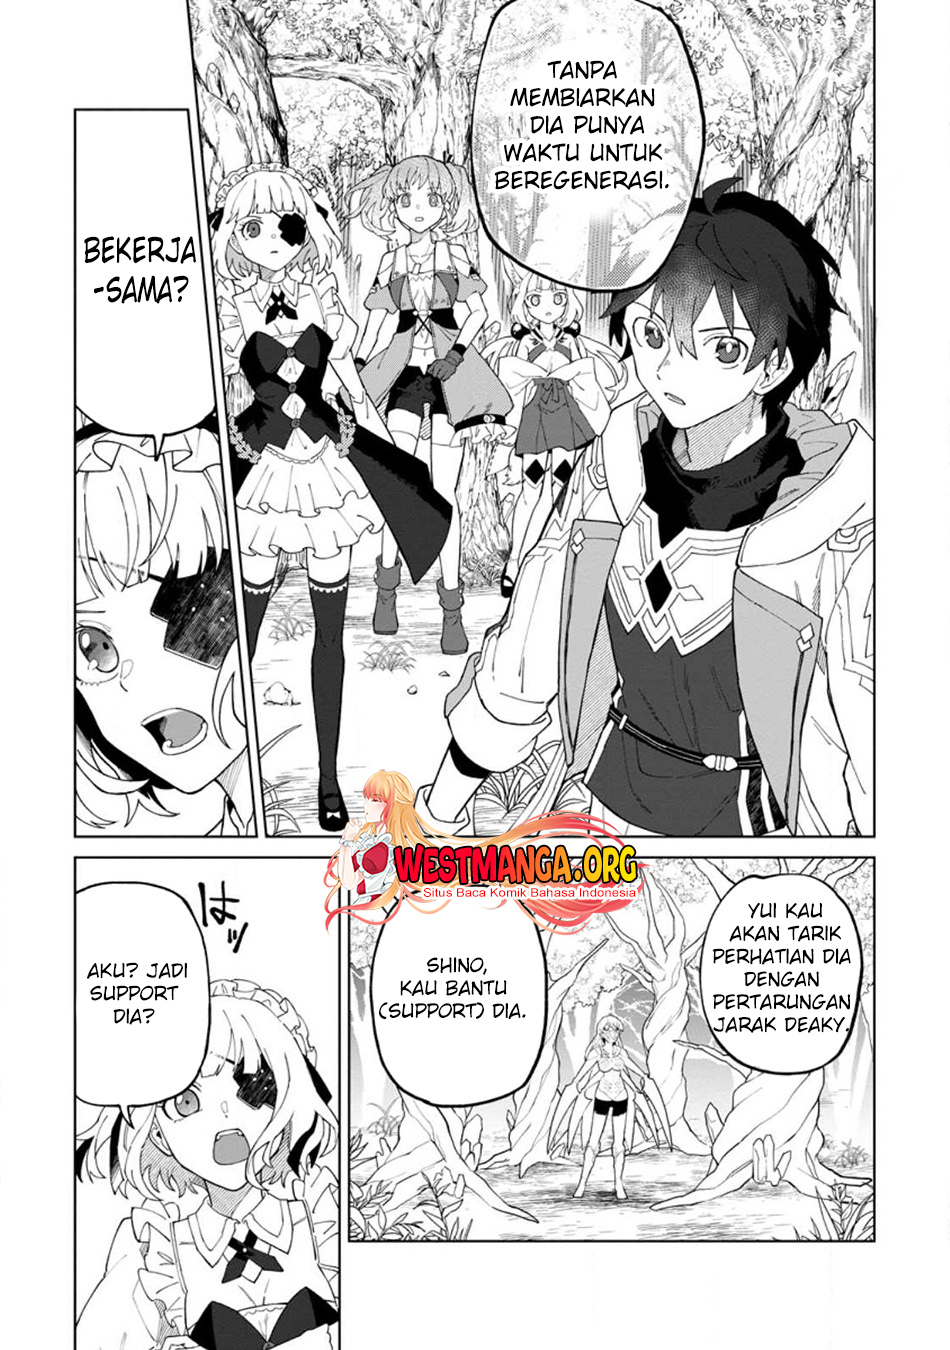 The White Mage Who Was Banished From the Hero’s Party Is Picked up by an S Rank Adventurer ~ This White Mage Is Too Out of the Ordinary! Chapter 26.2